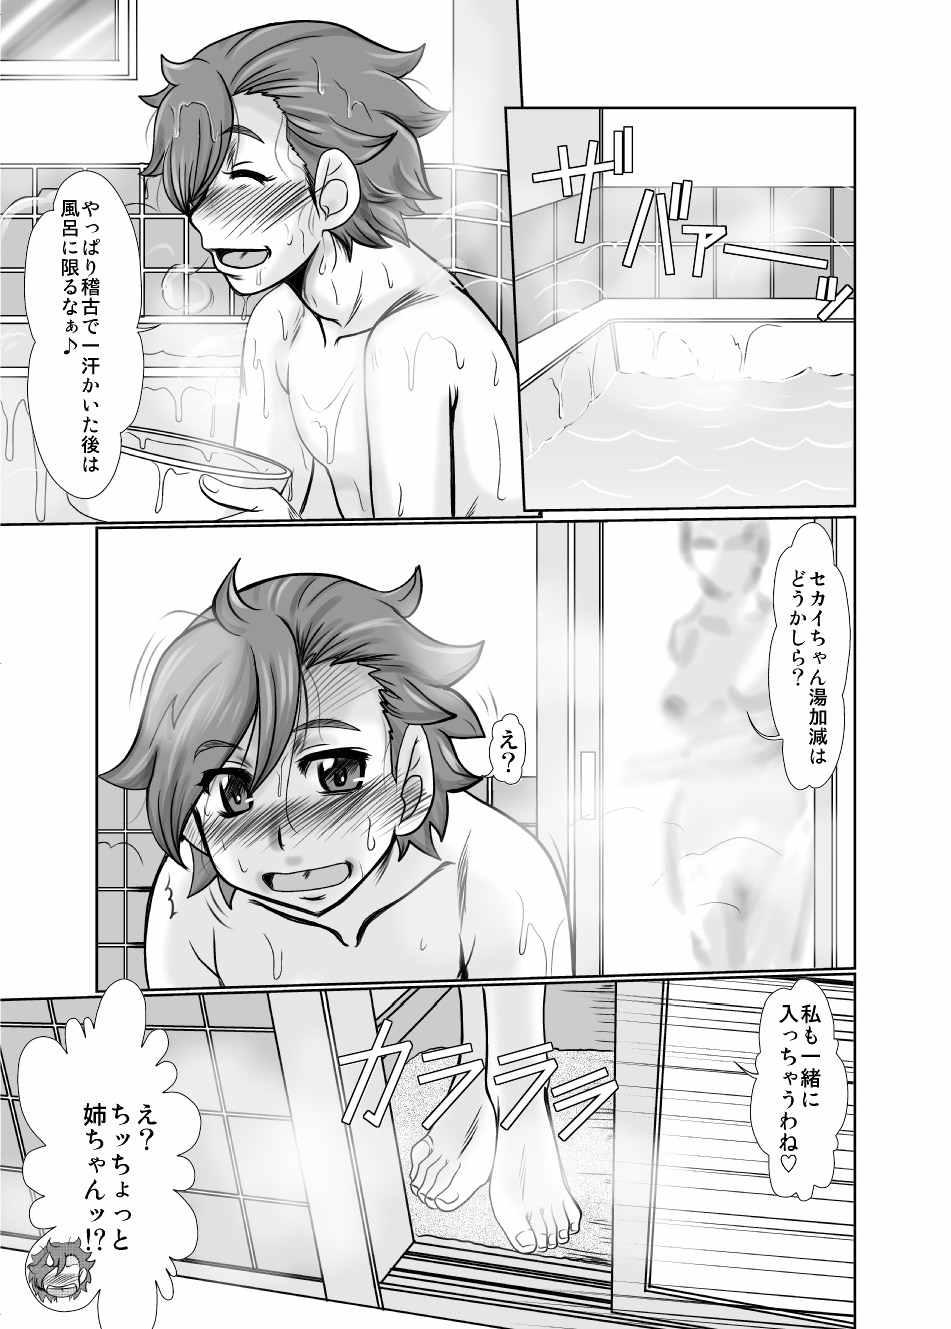 Jacking Off F-83 - Gundam build fighters try Hard Fucking - Page 9